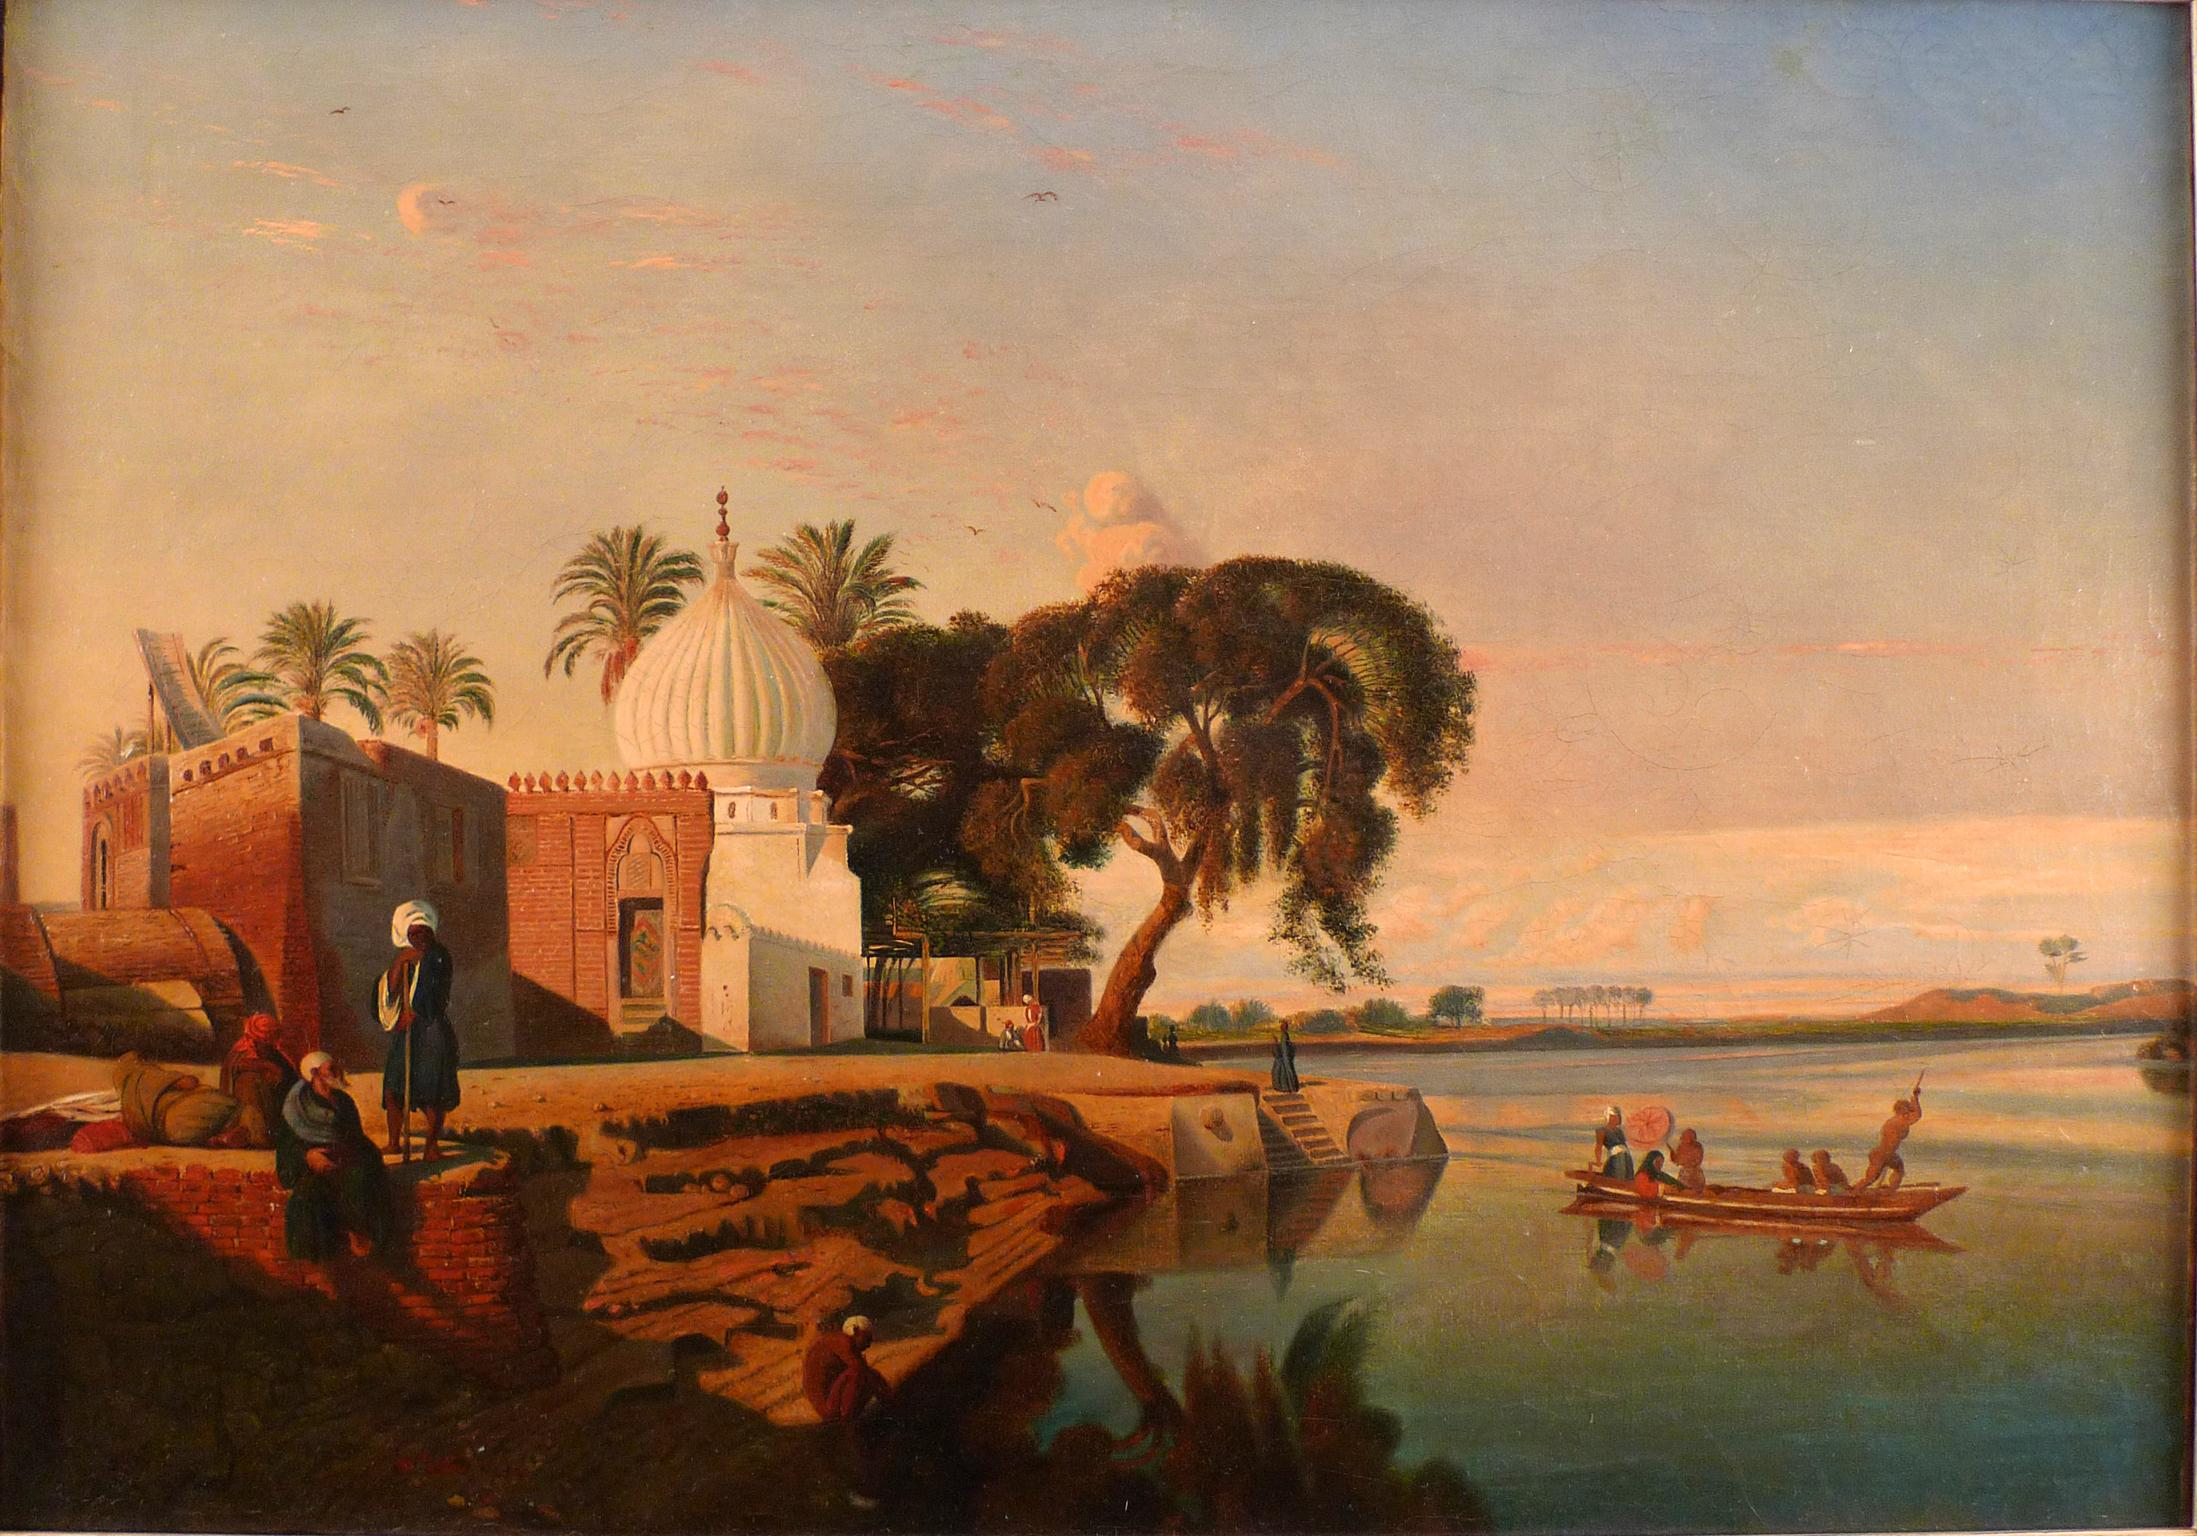 Prosper Georges Antoine Marilhat Landscape Painting - "On the Nile", 19th Century Oil on Canvas by French Artist, Prosper Marilhat